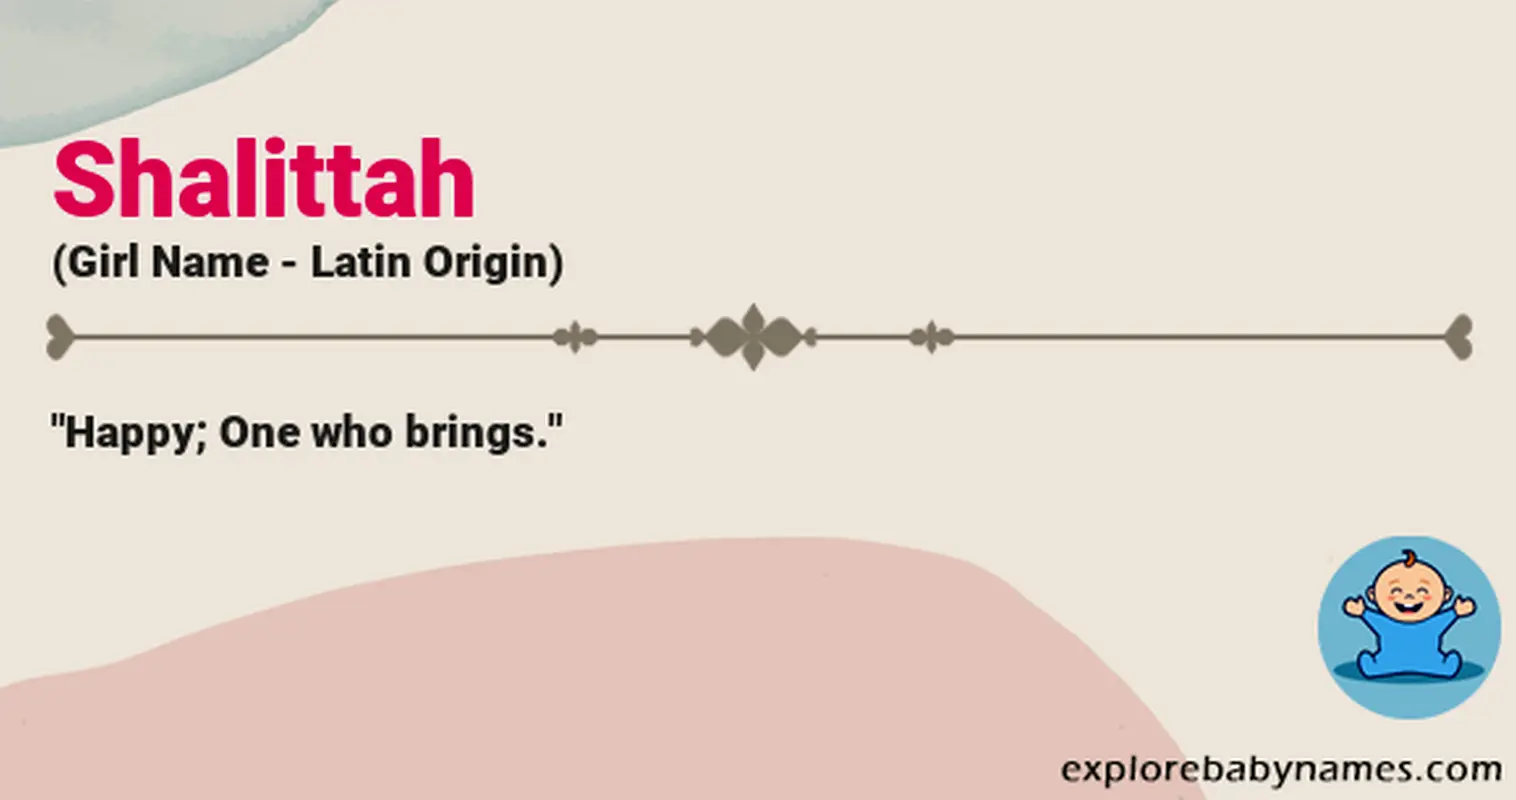 Meaning of Shalittah